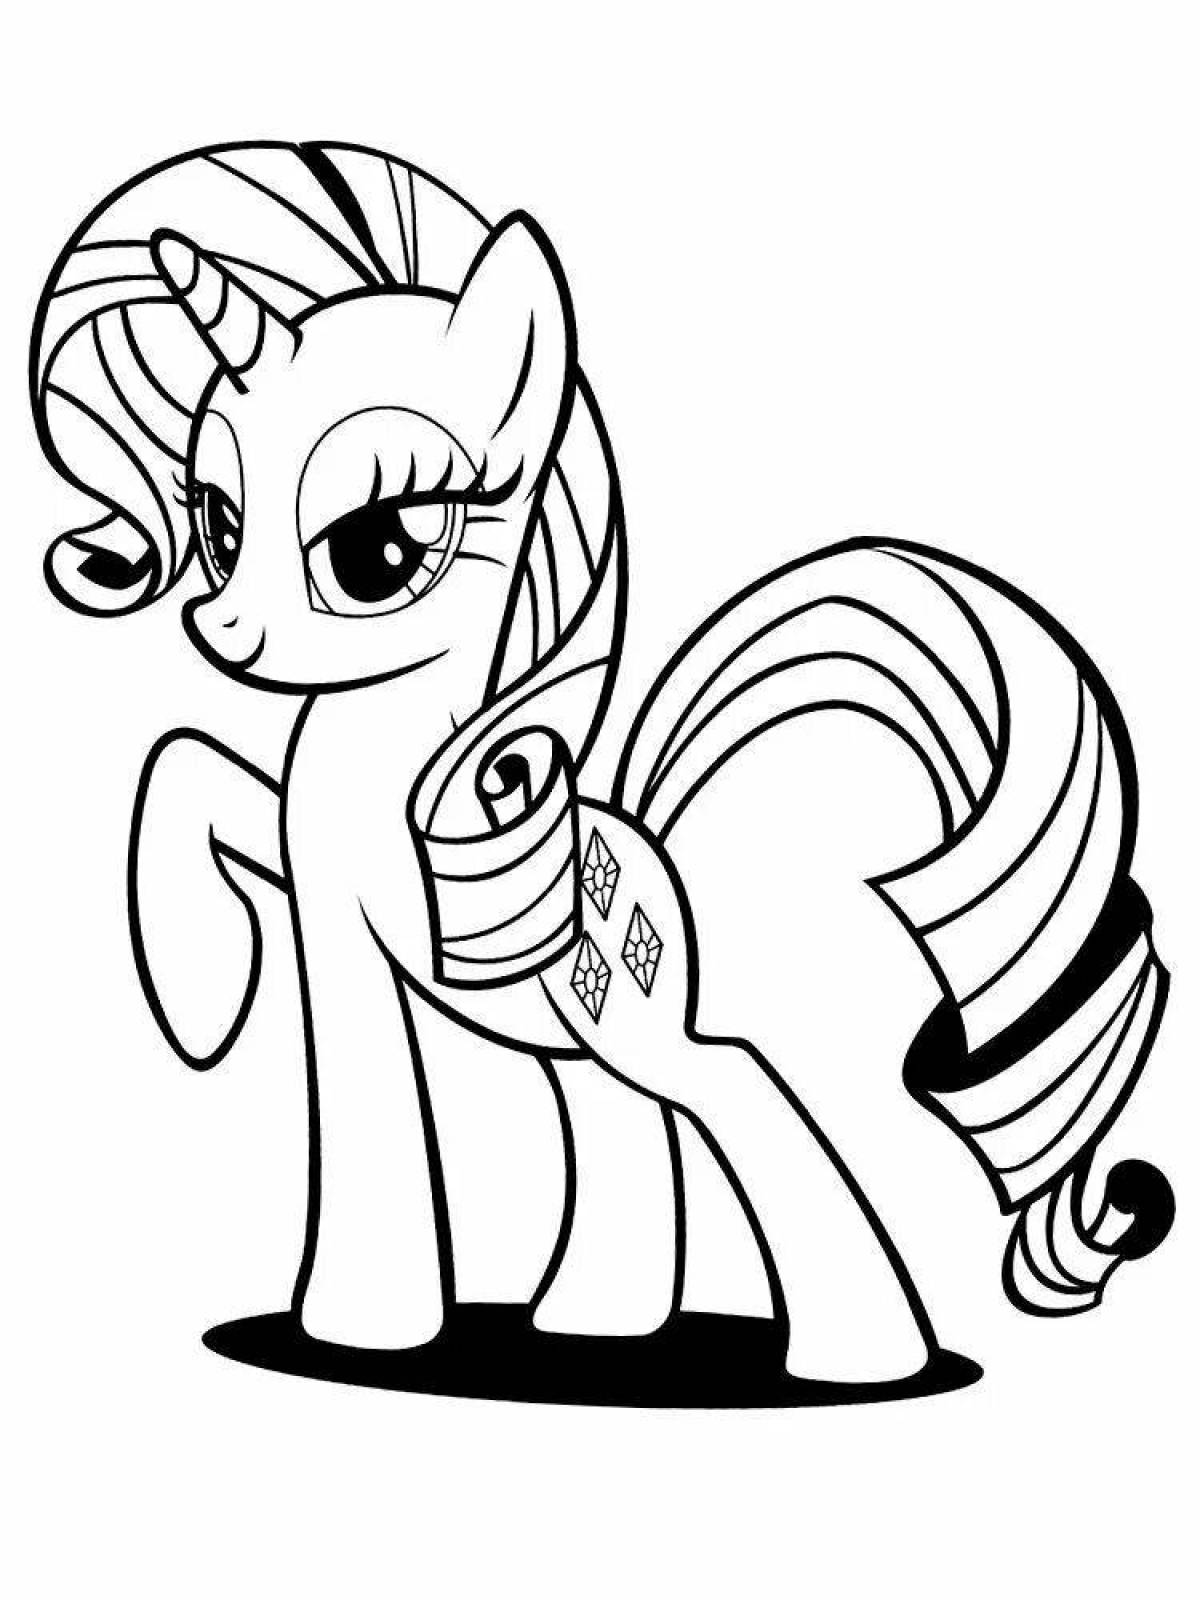 Coloring page funny baby pony